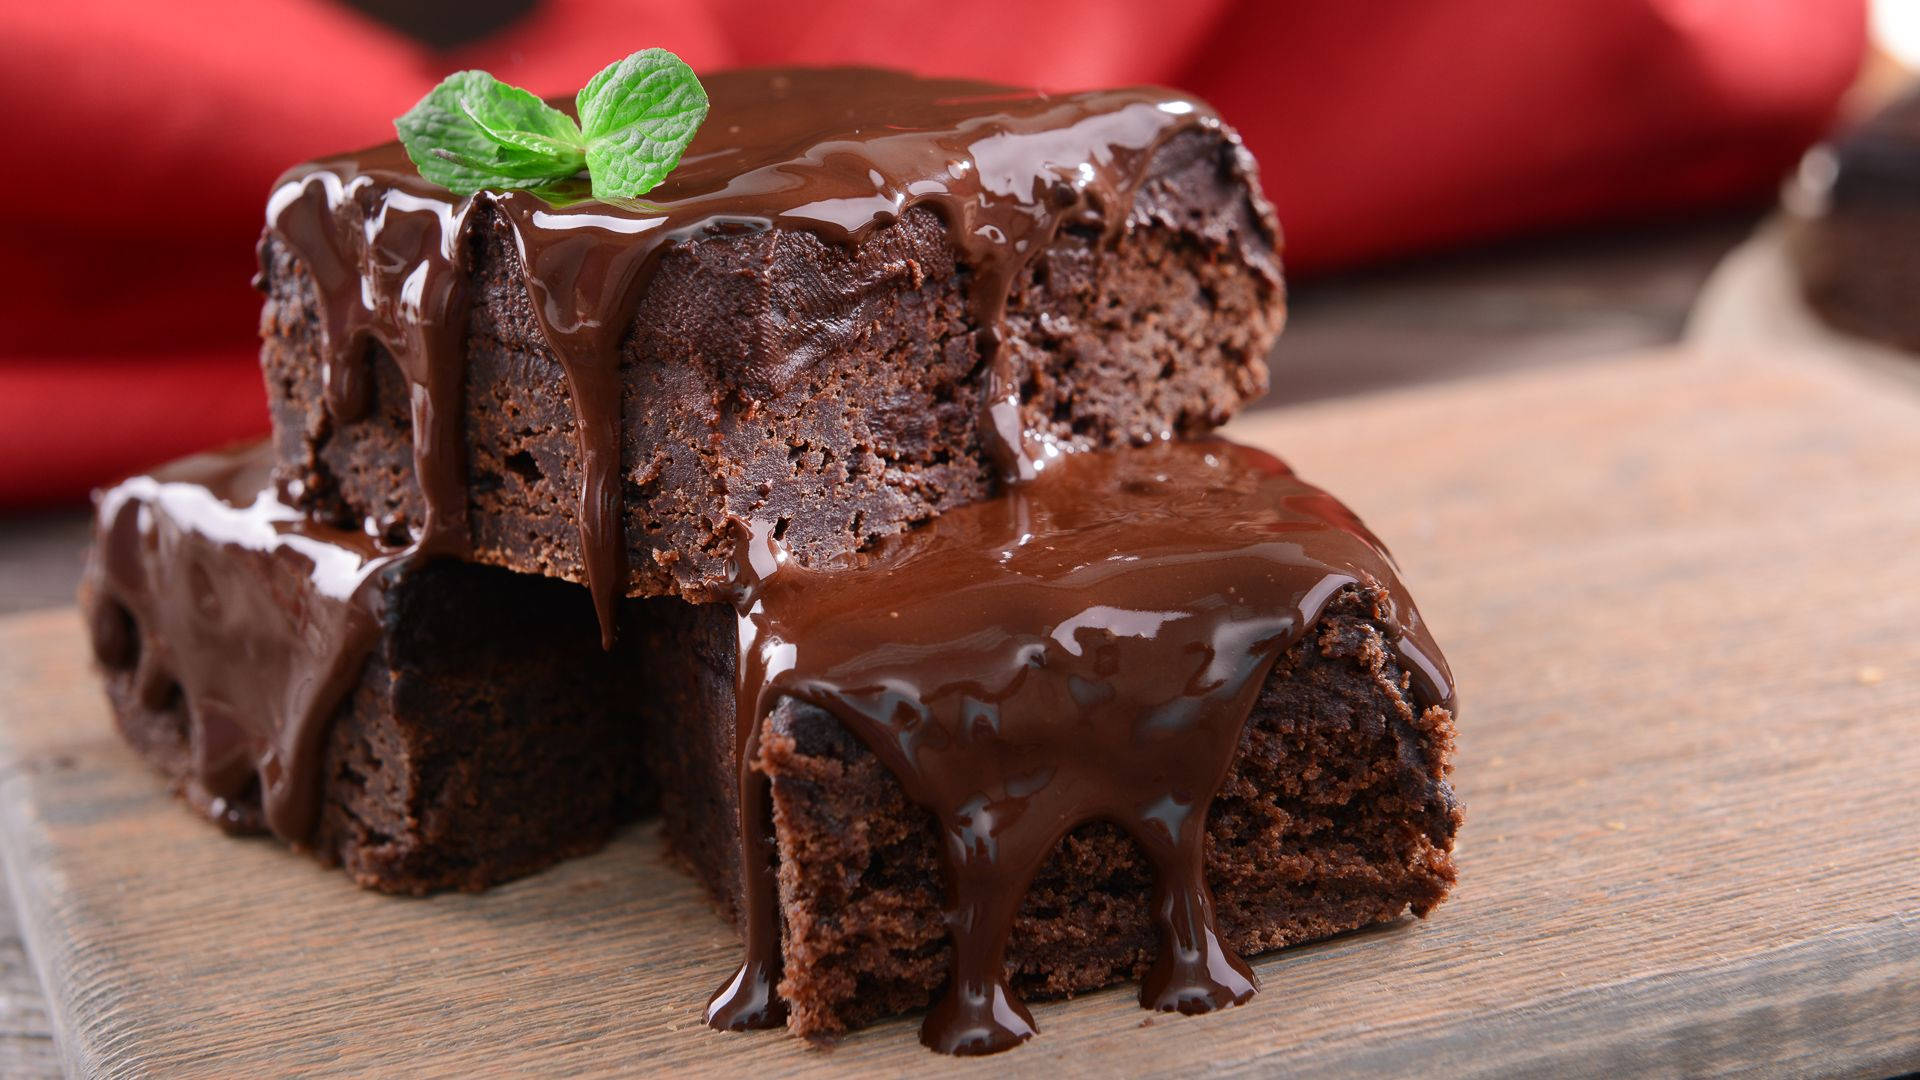 Brownies With Dripping Chocolate